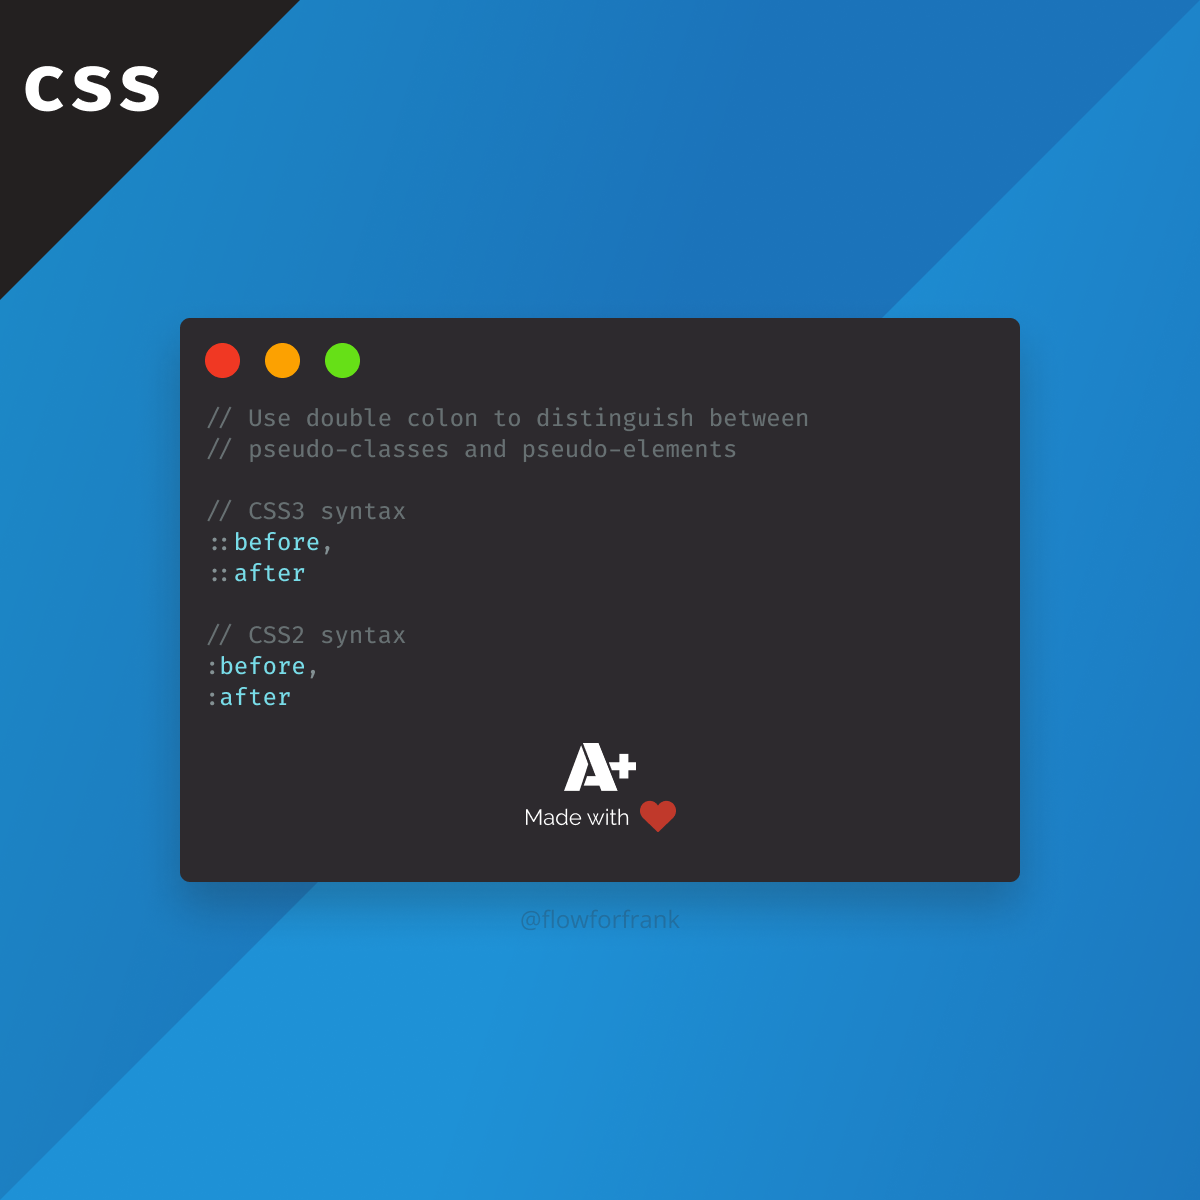 What is the difference between sing and double colon in CSS?